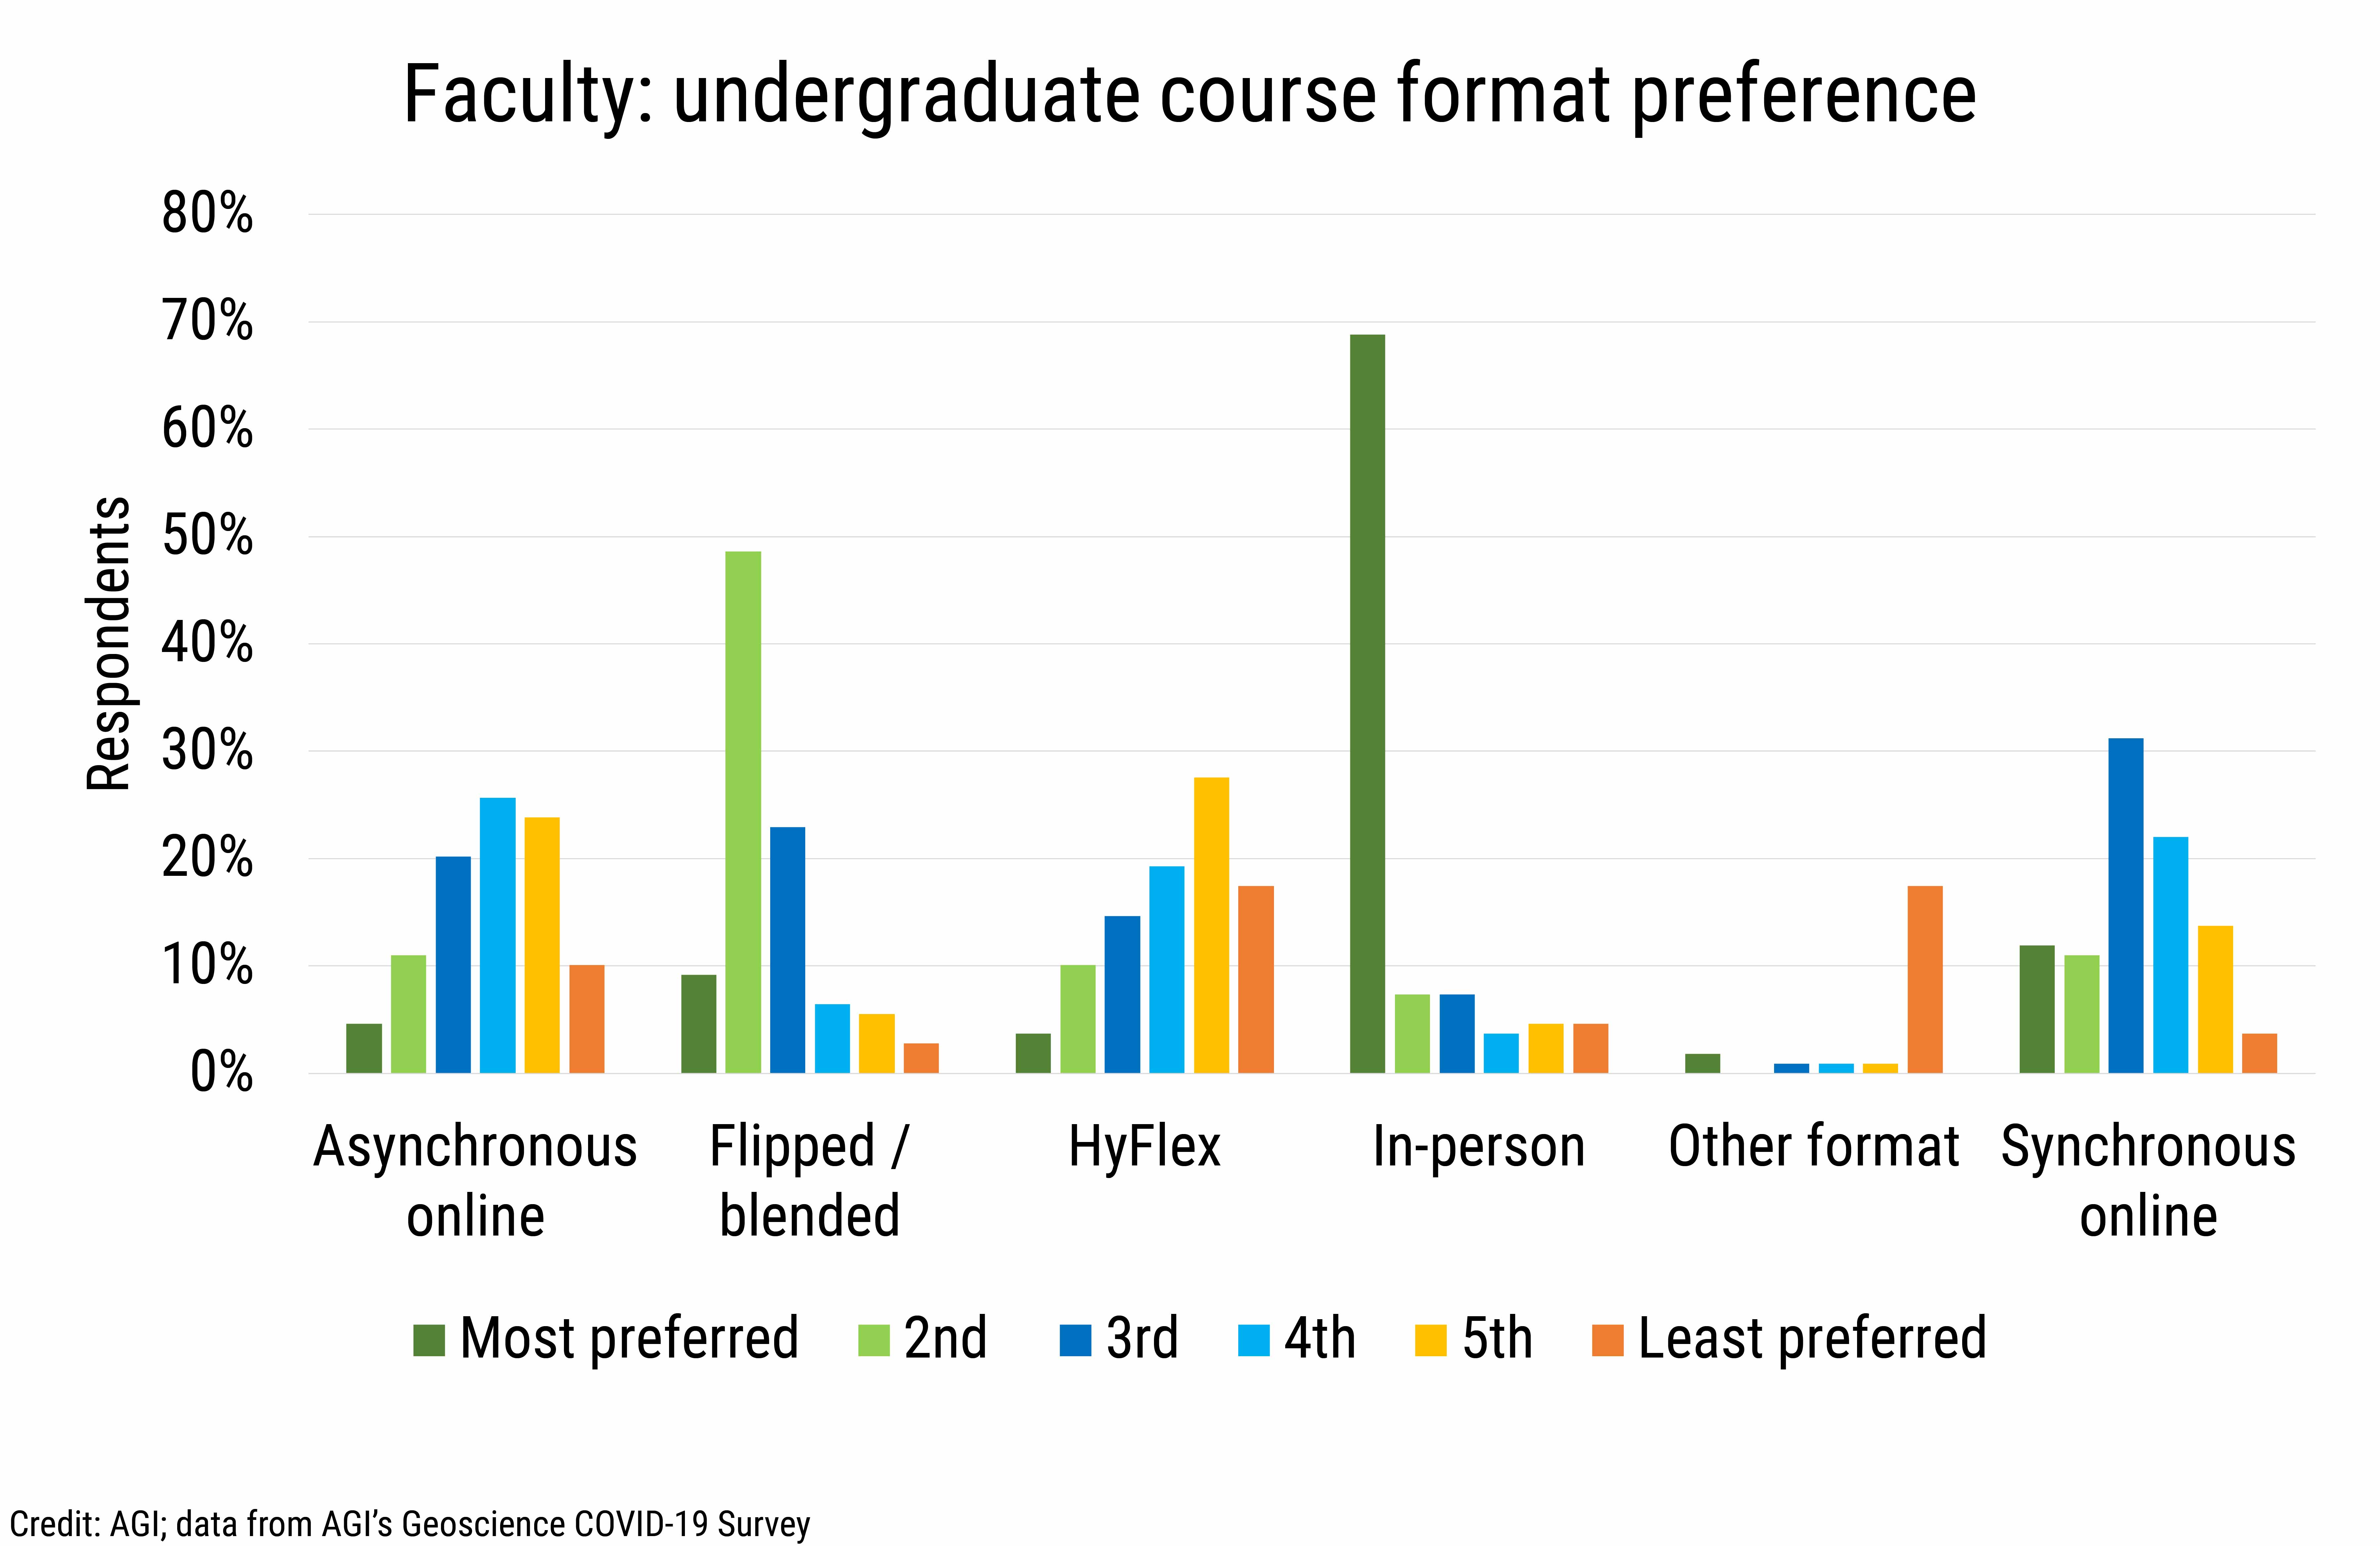 DB_2020-031 chart03 Faculty undergraduate course format preference (Credit: AGI; data from AGI's Geoscience COVID-19 Survey)